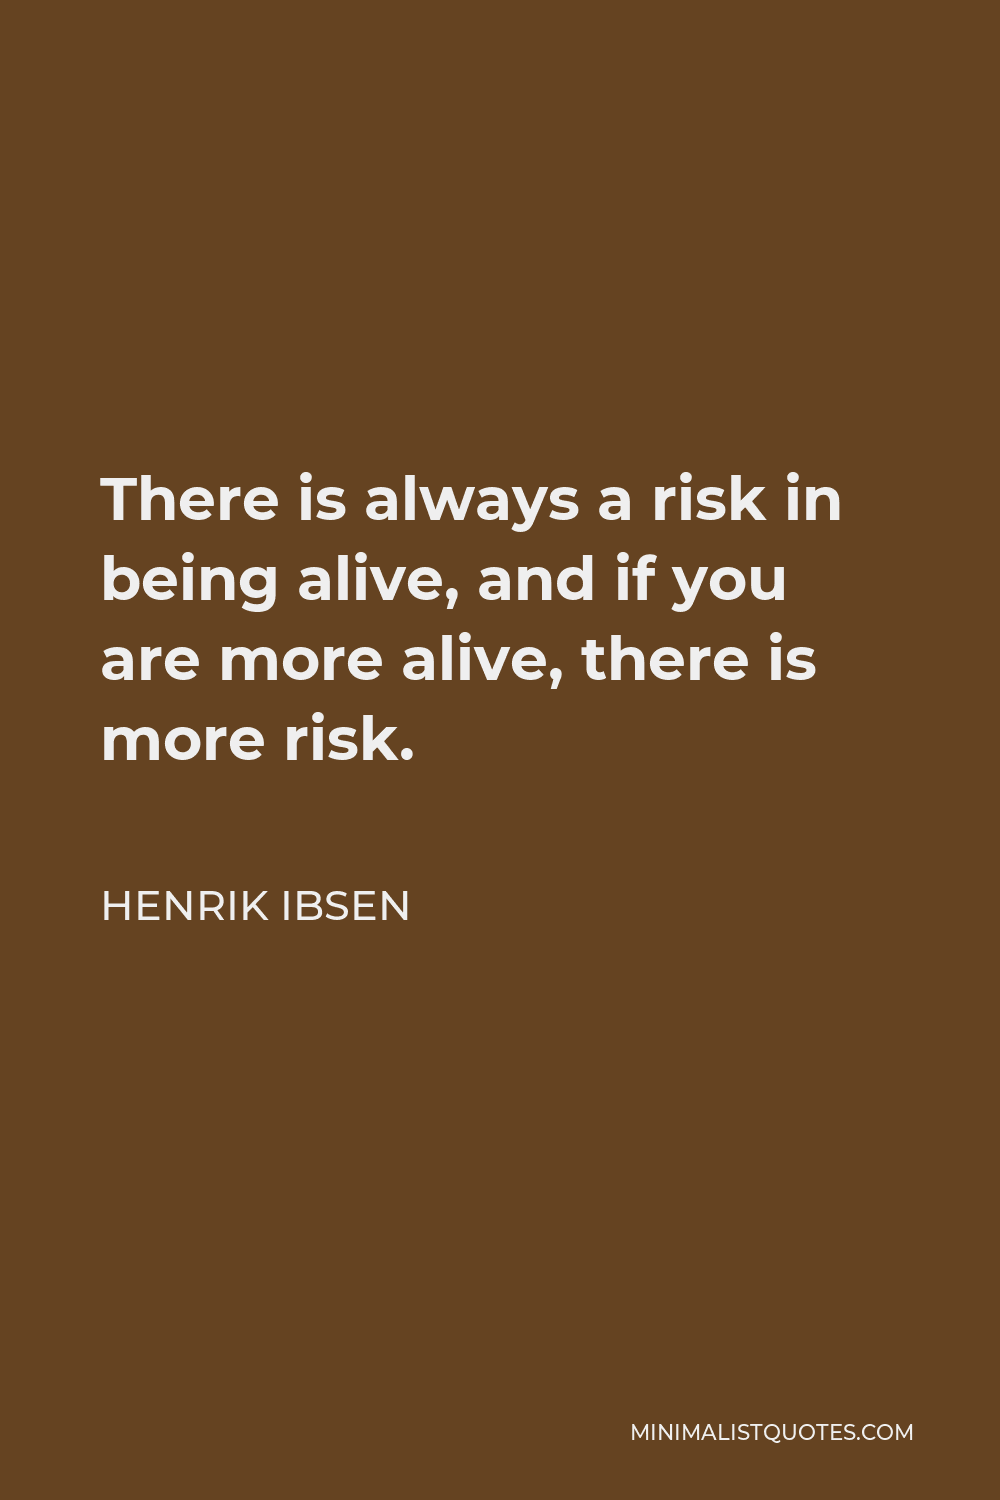 Henrik Ibsen Quote - There is always a risk in being alive, and if you are more alive, there is more risk.